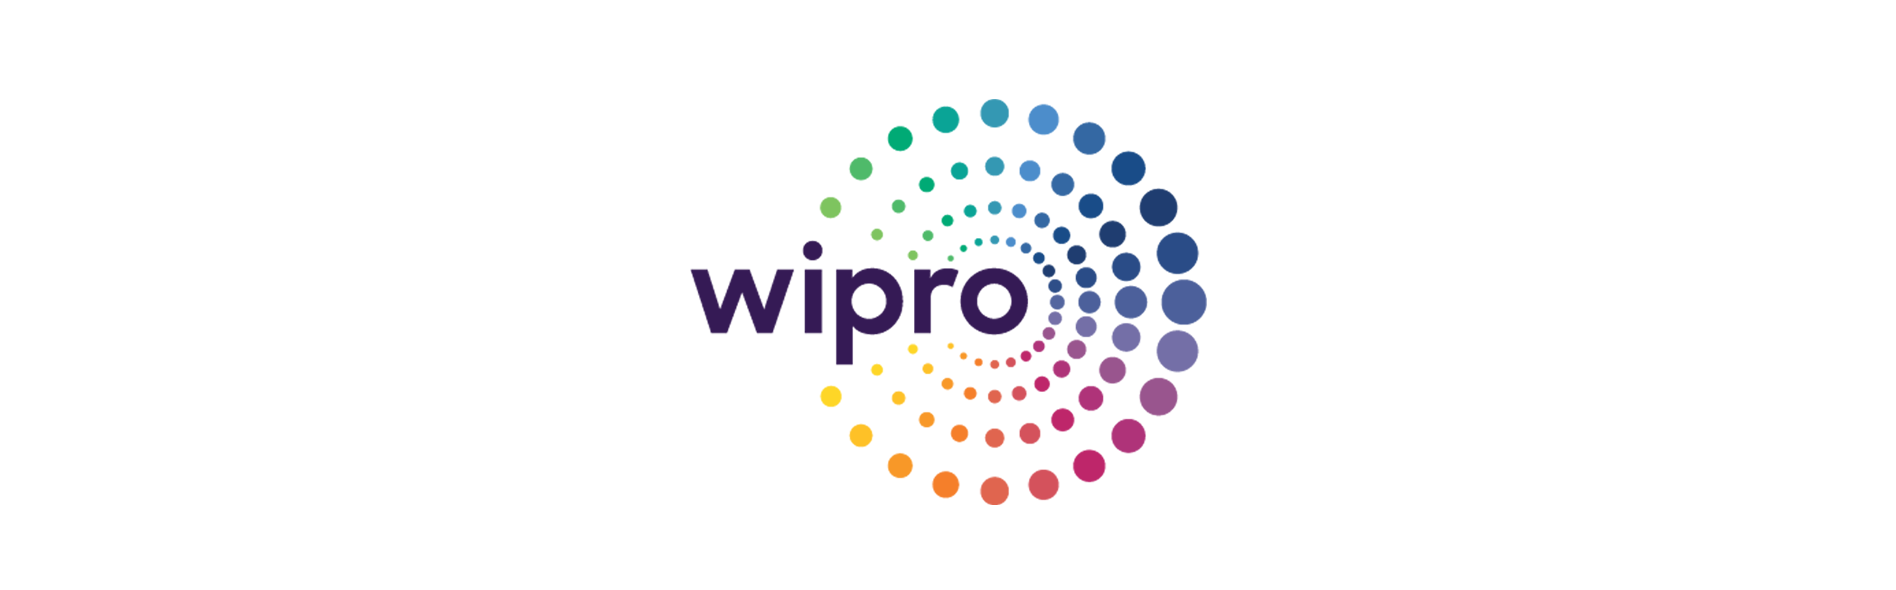 Enhance Cloud Transformation Journey with Wipro and AWS